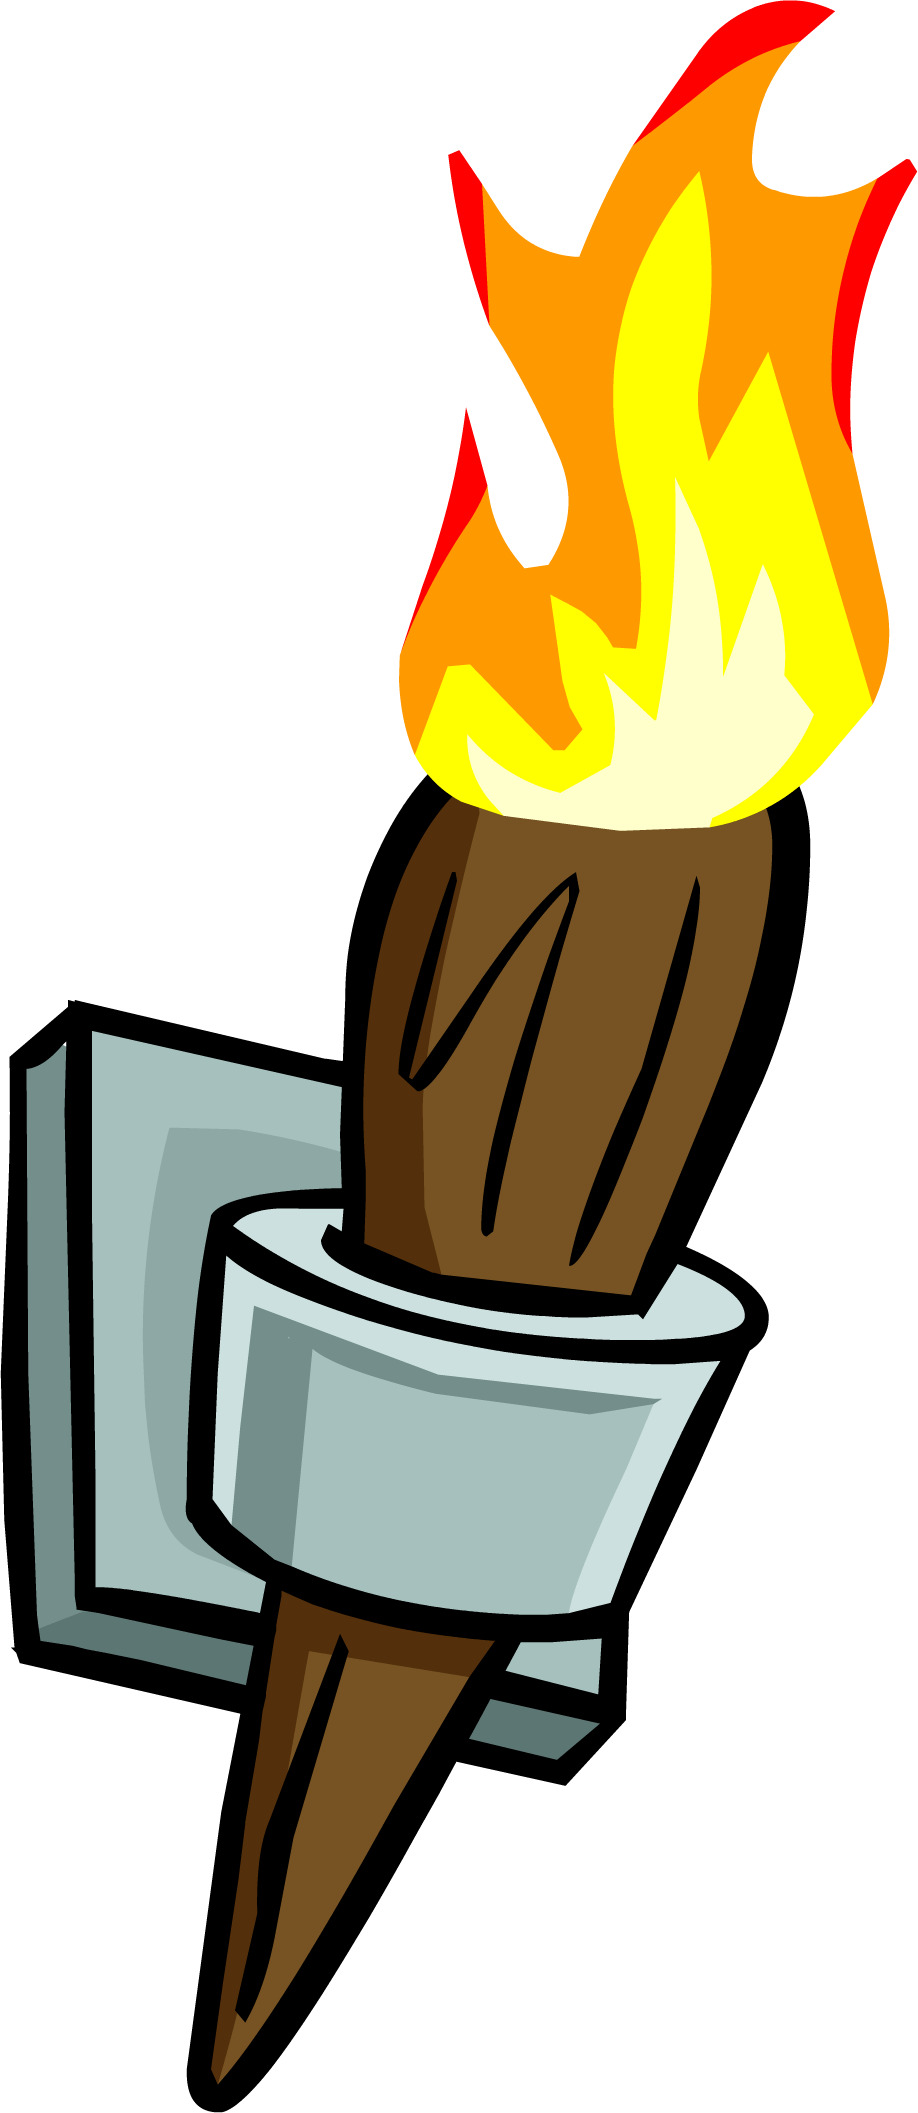 Wall Torch Clipart icons